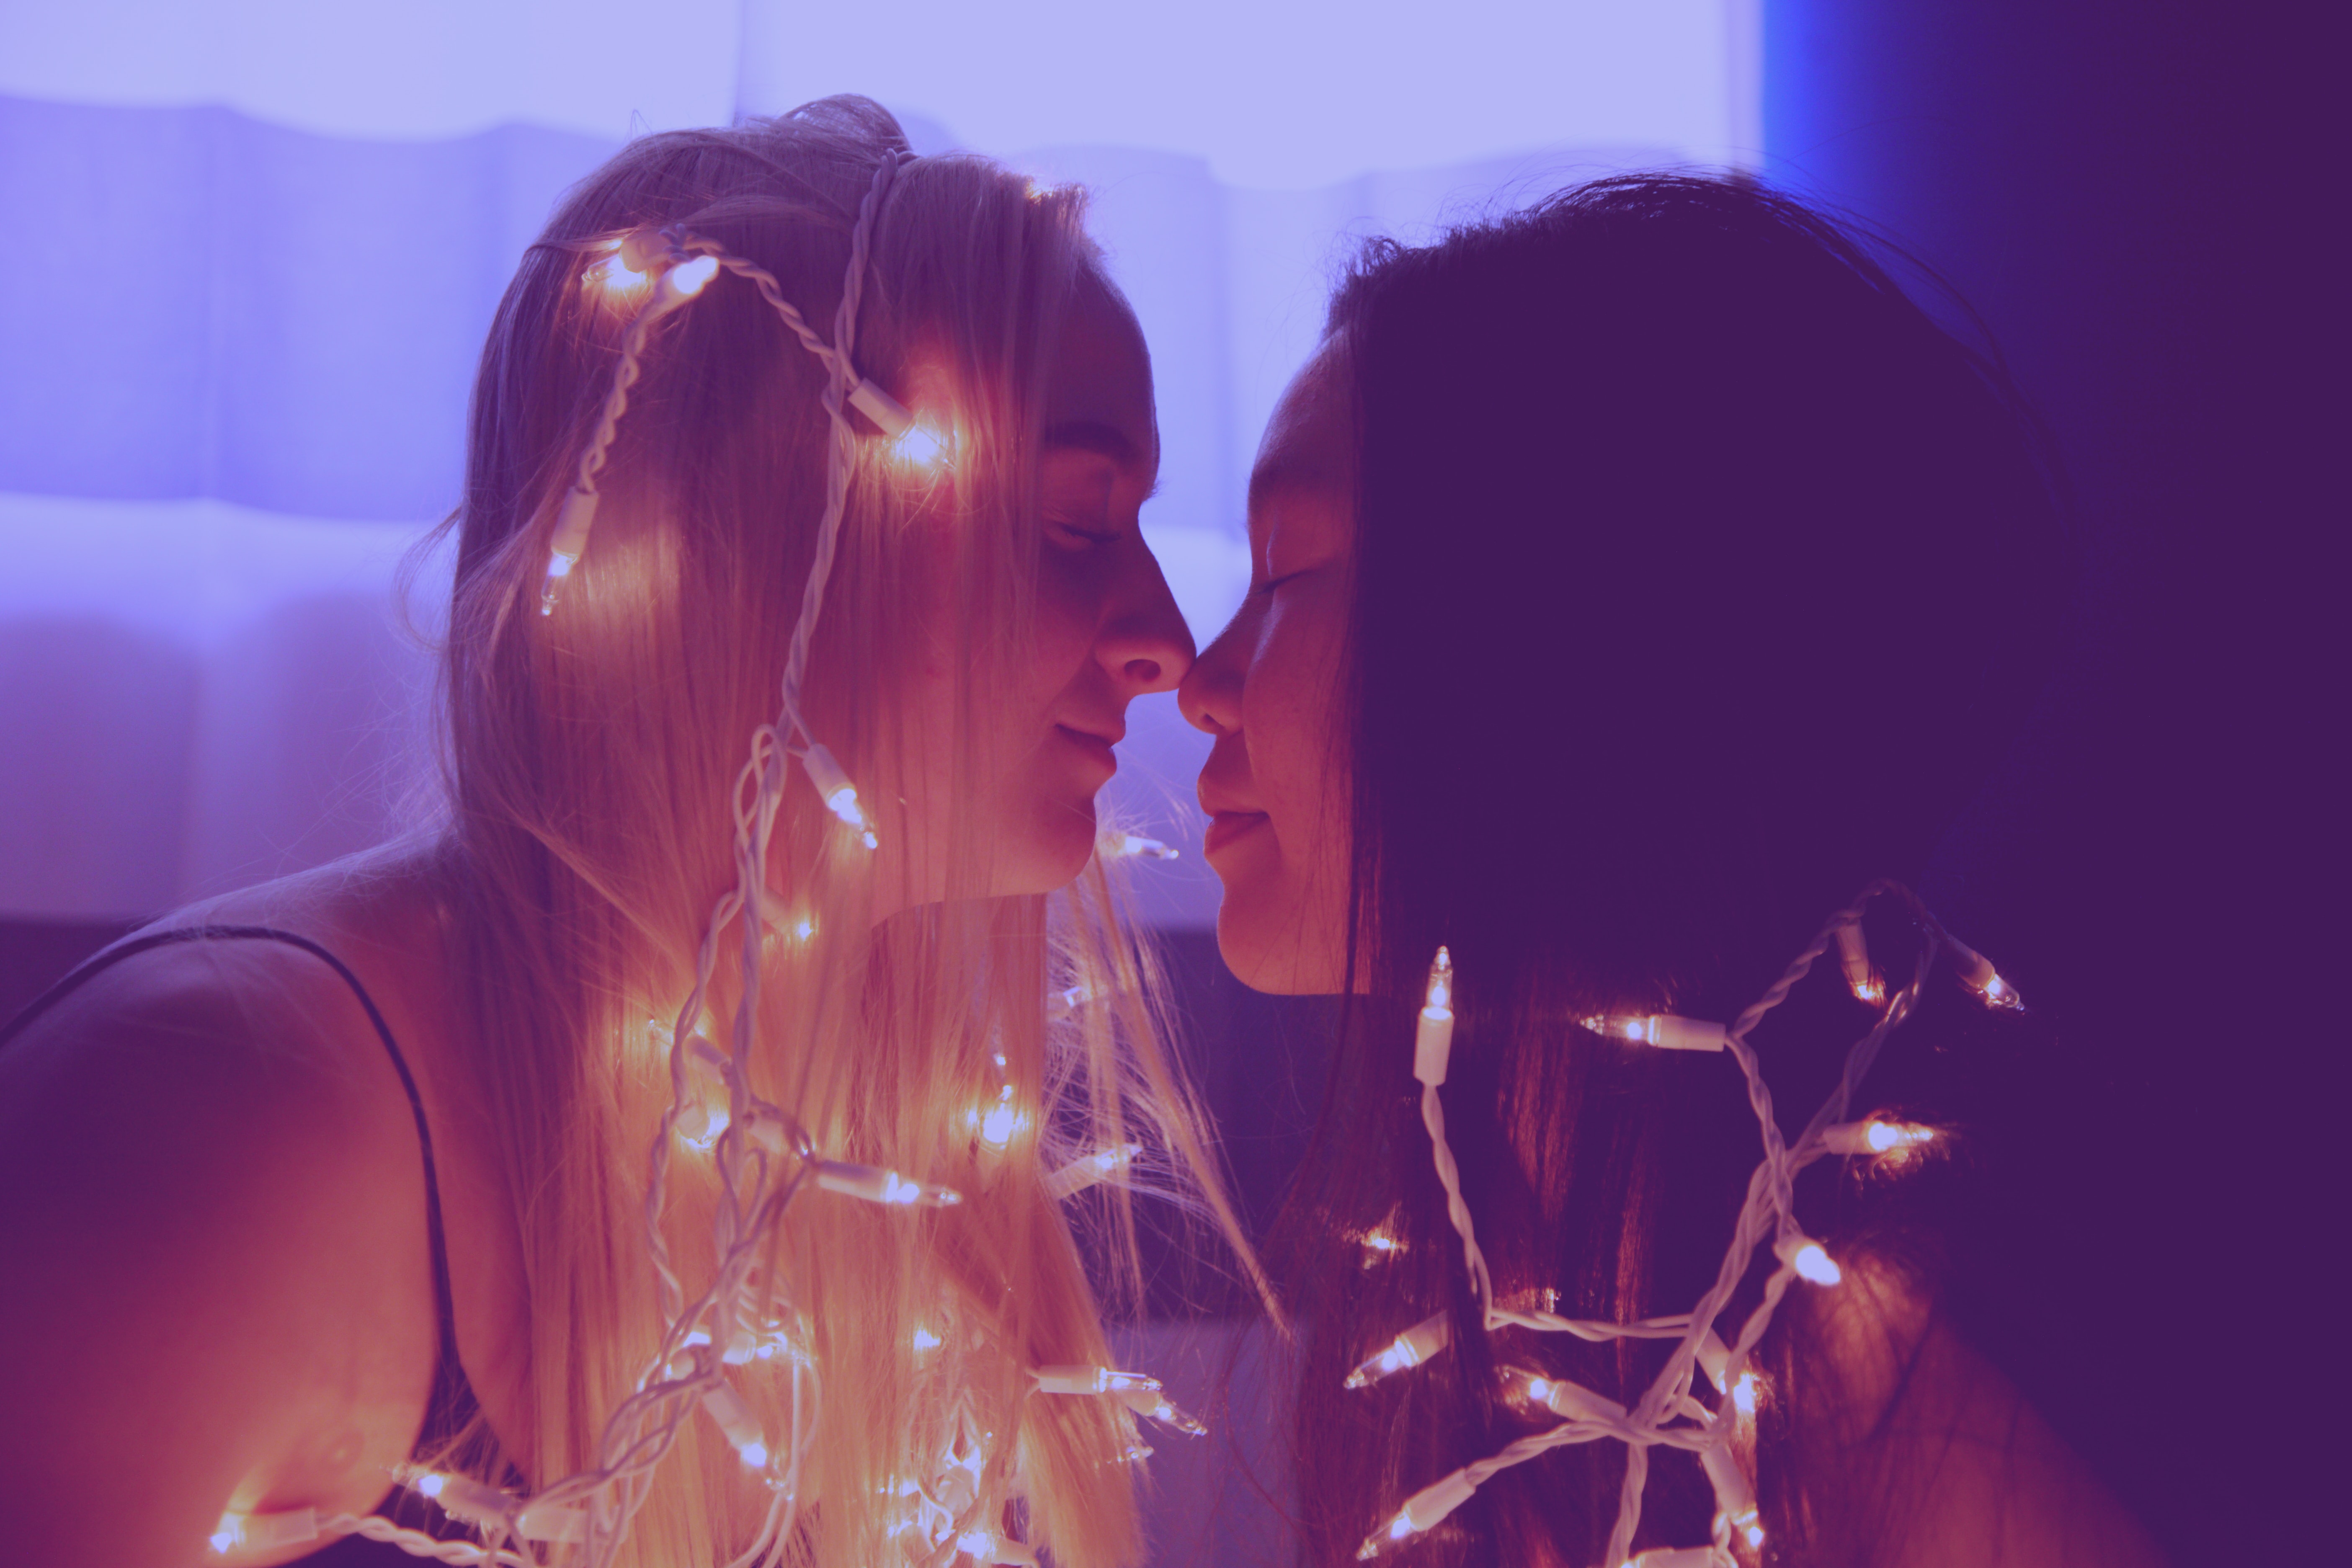 A couple with fairy lights strewn over them | Source: Unsplash